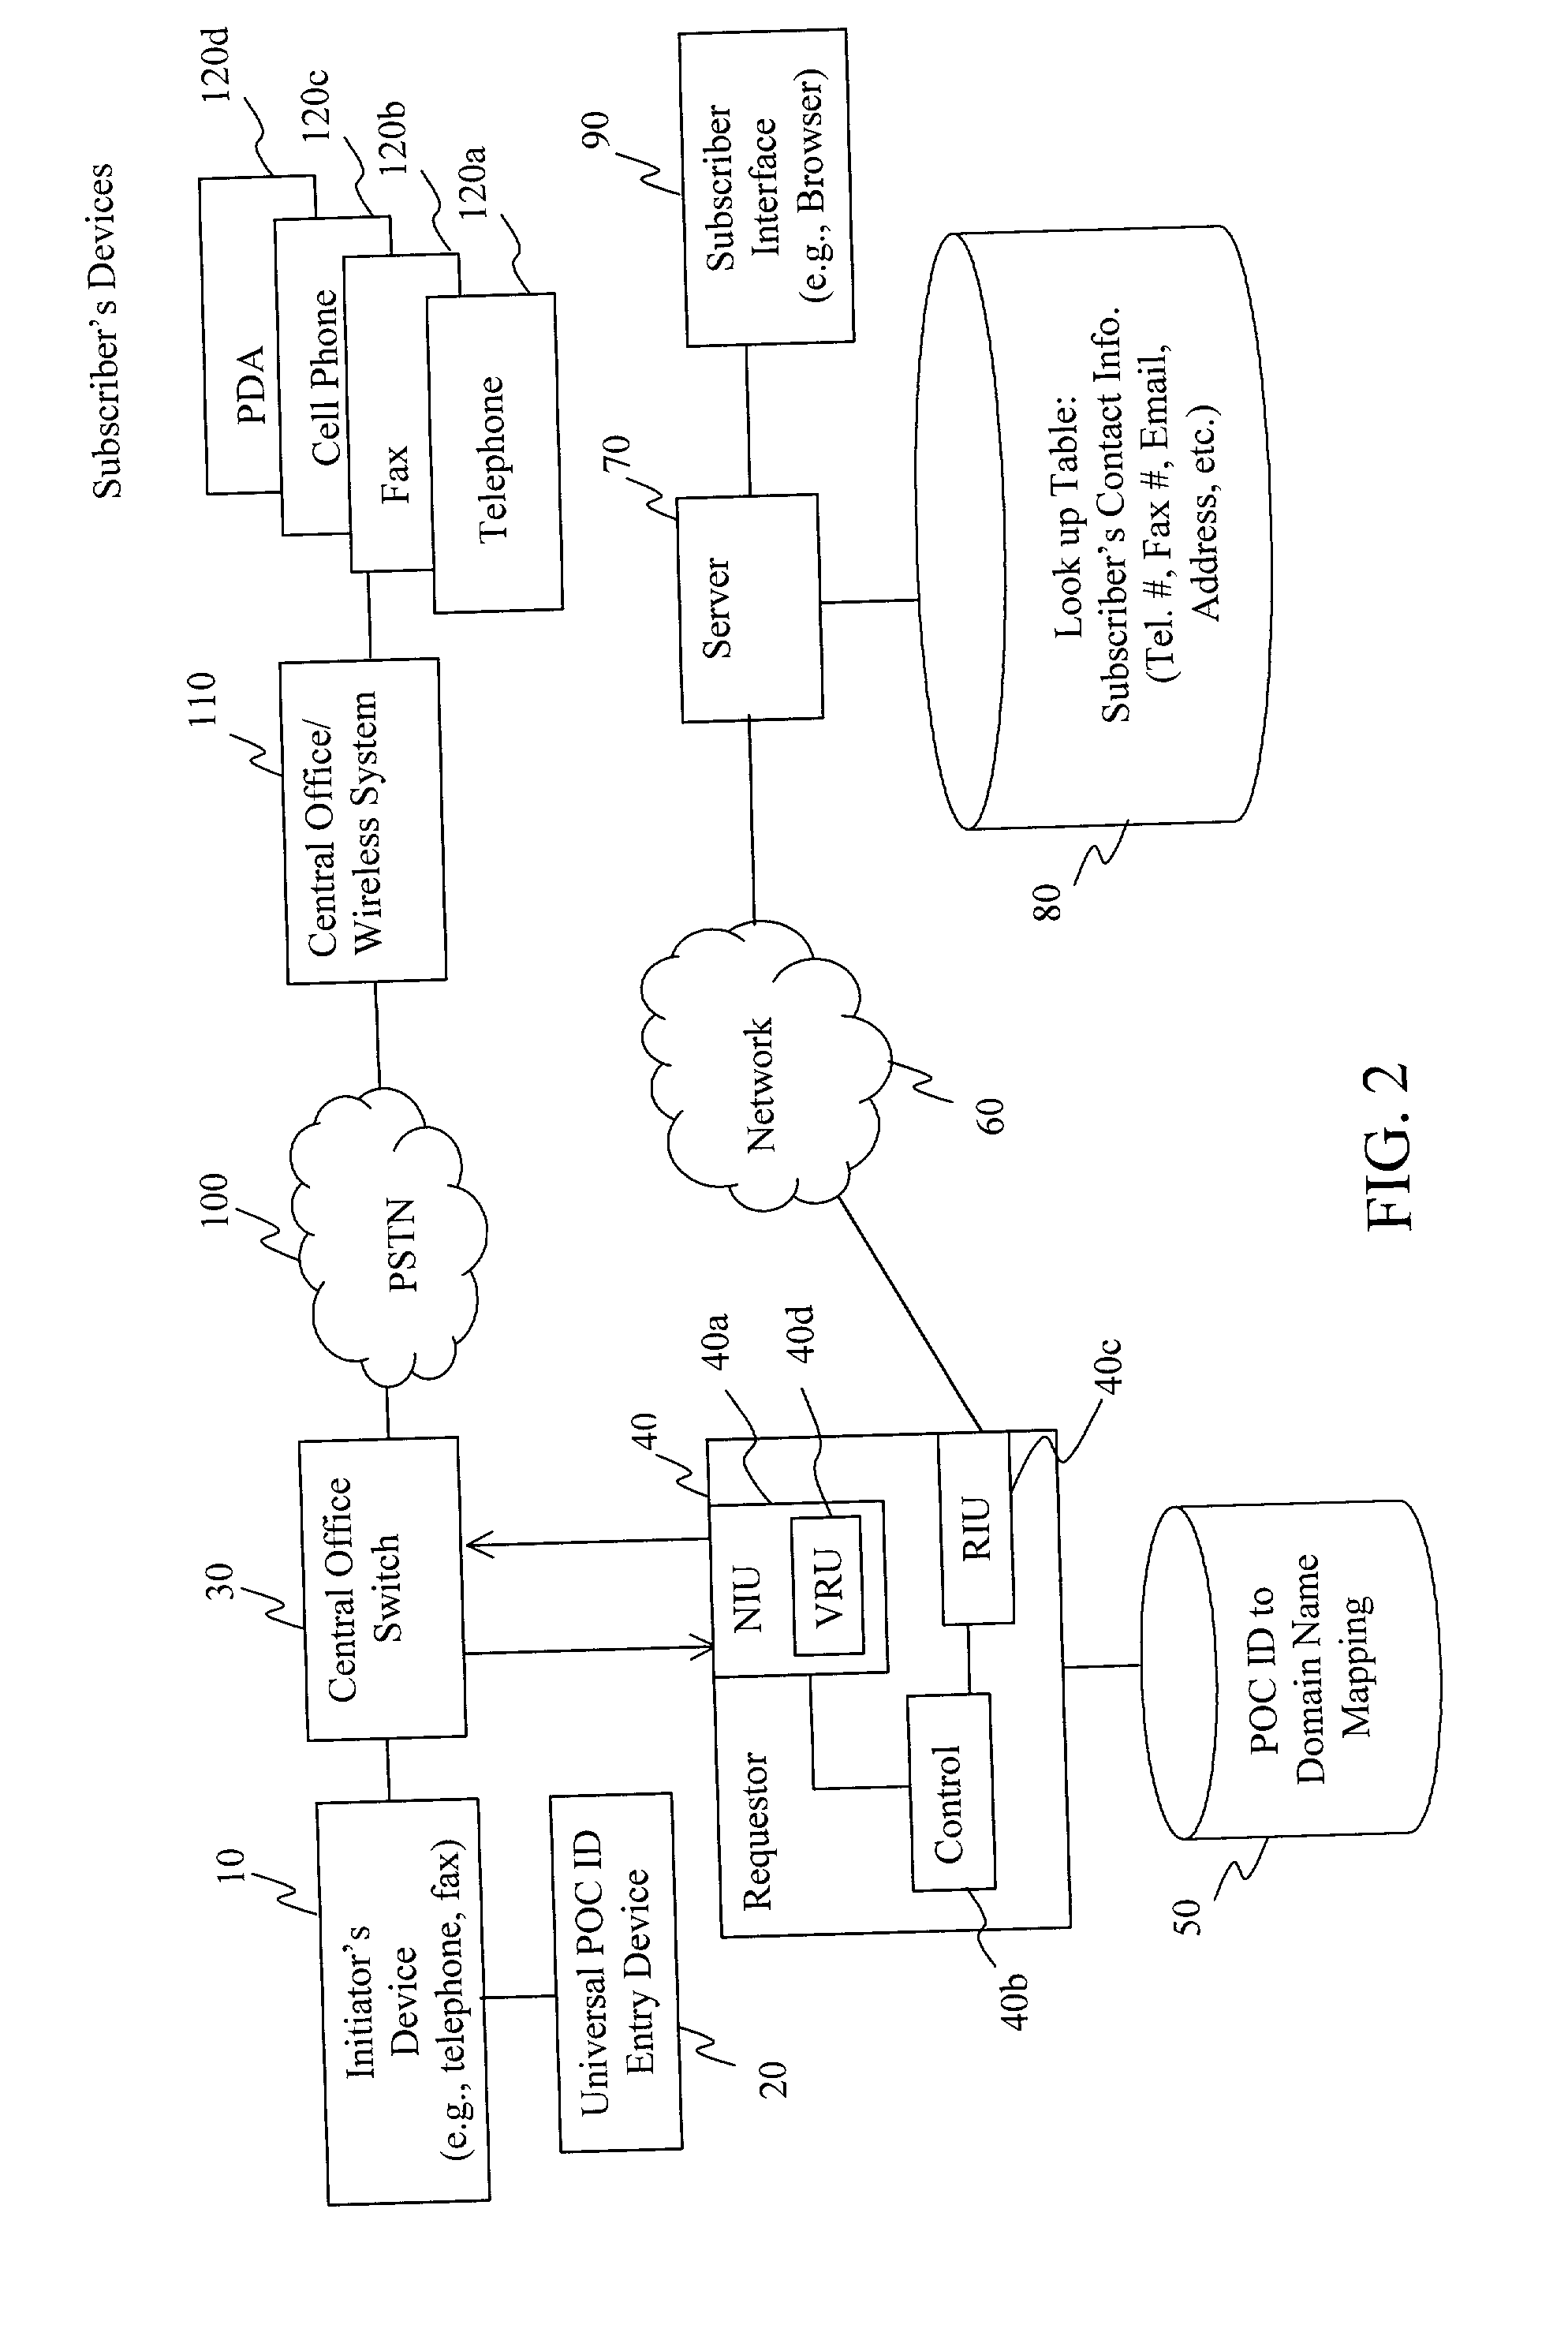 Universal point of contact identifier system and method